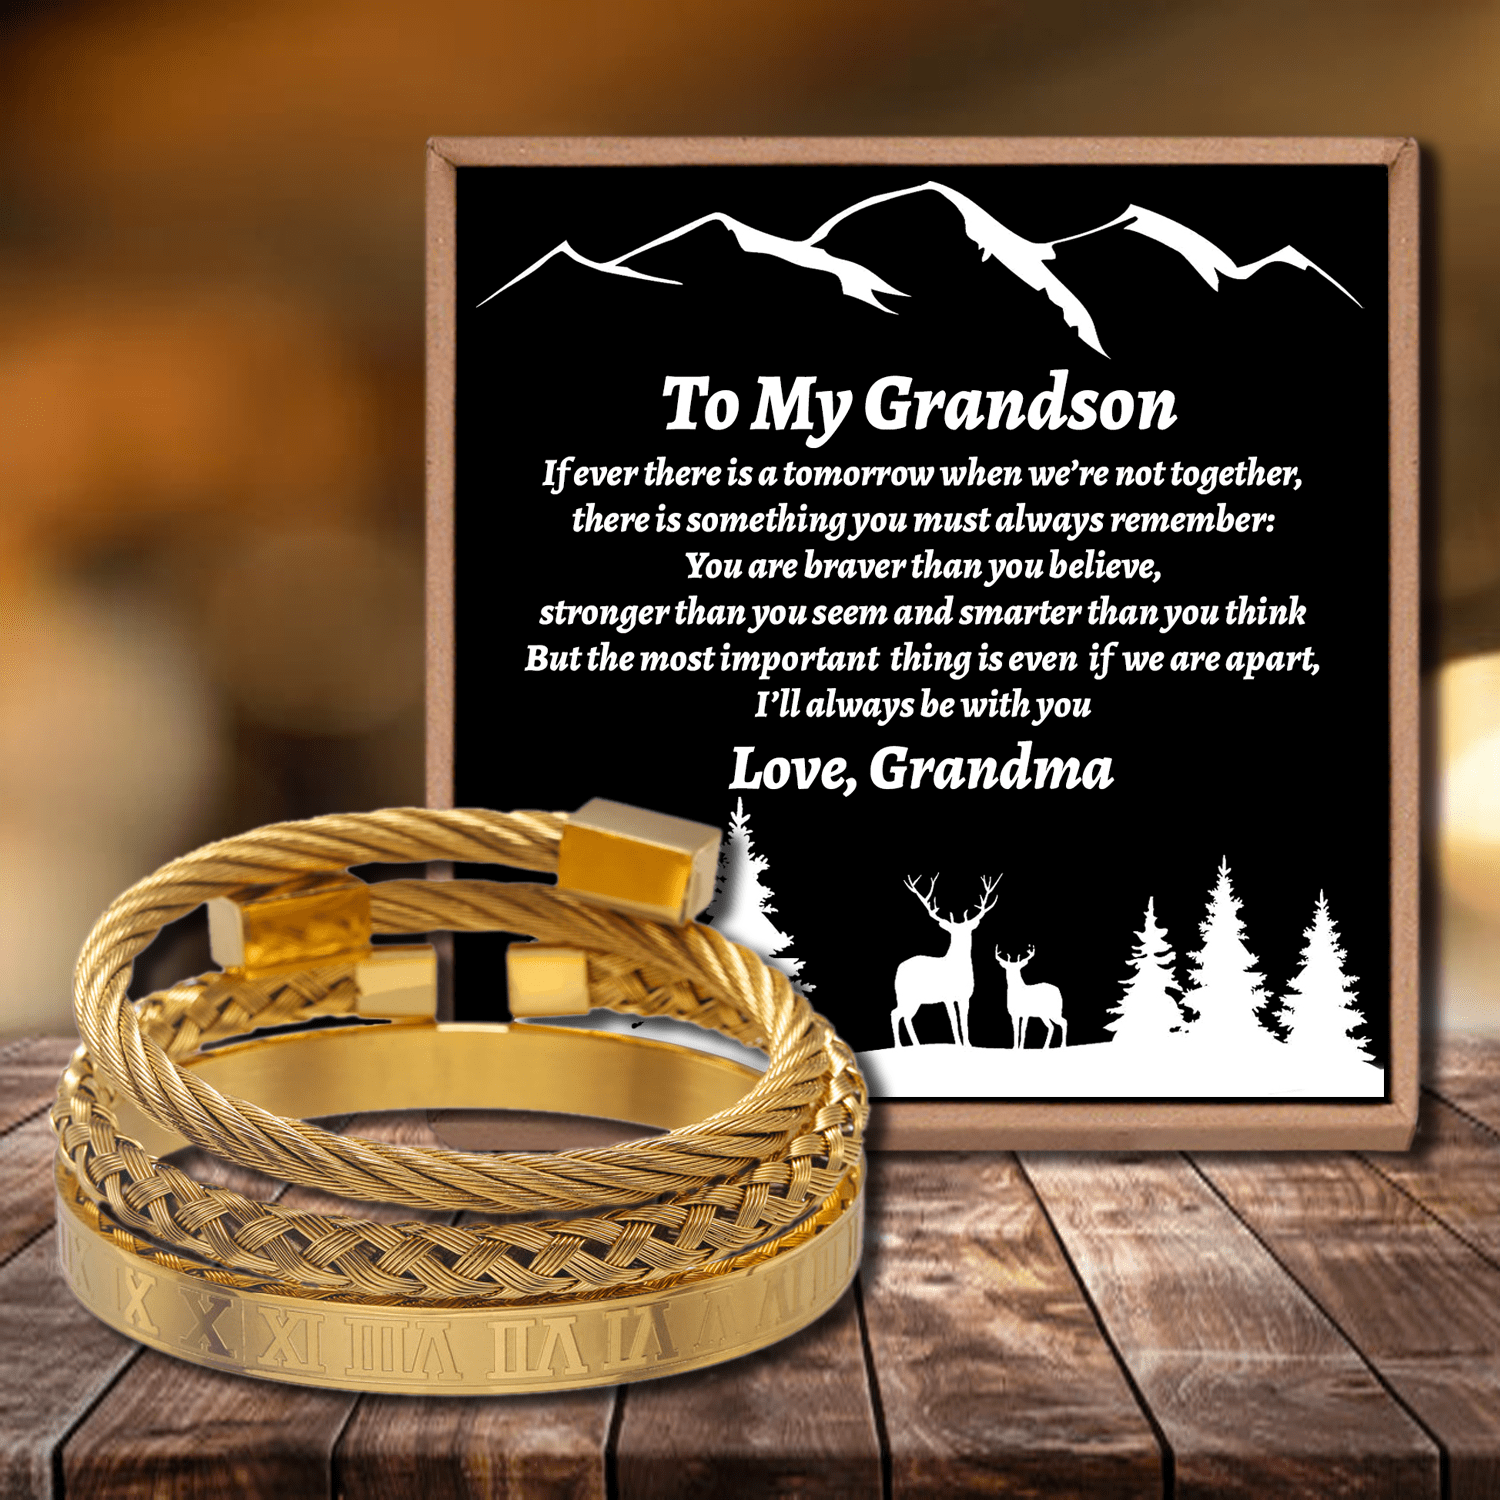 Bracelets Grandma To Grandson - I Will Always Be With You Roman Numeral Bracelet Set Gold GiveMe-Gifts